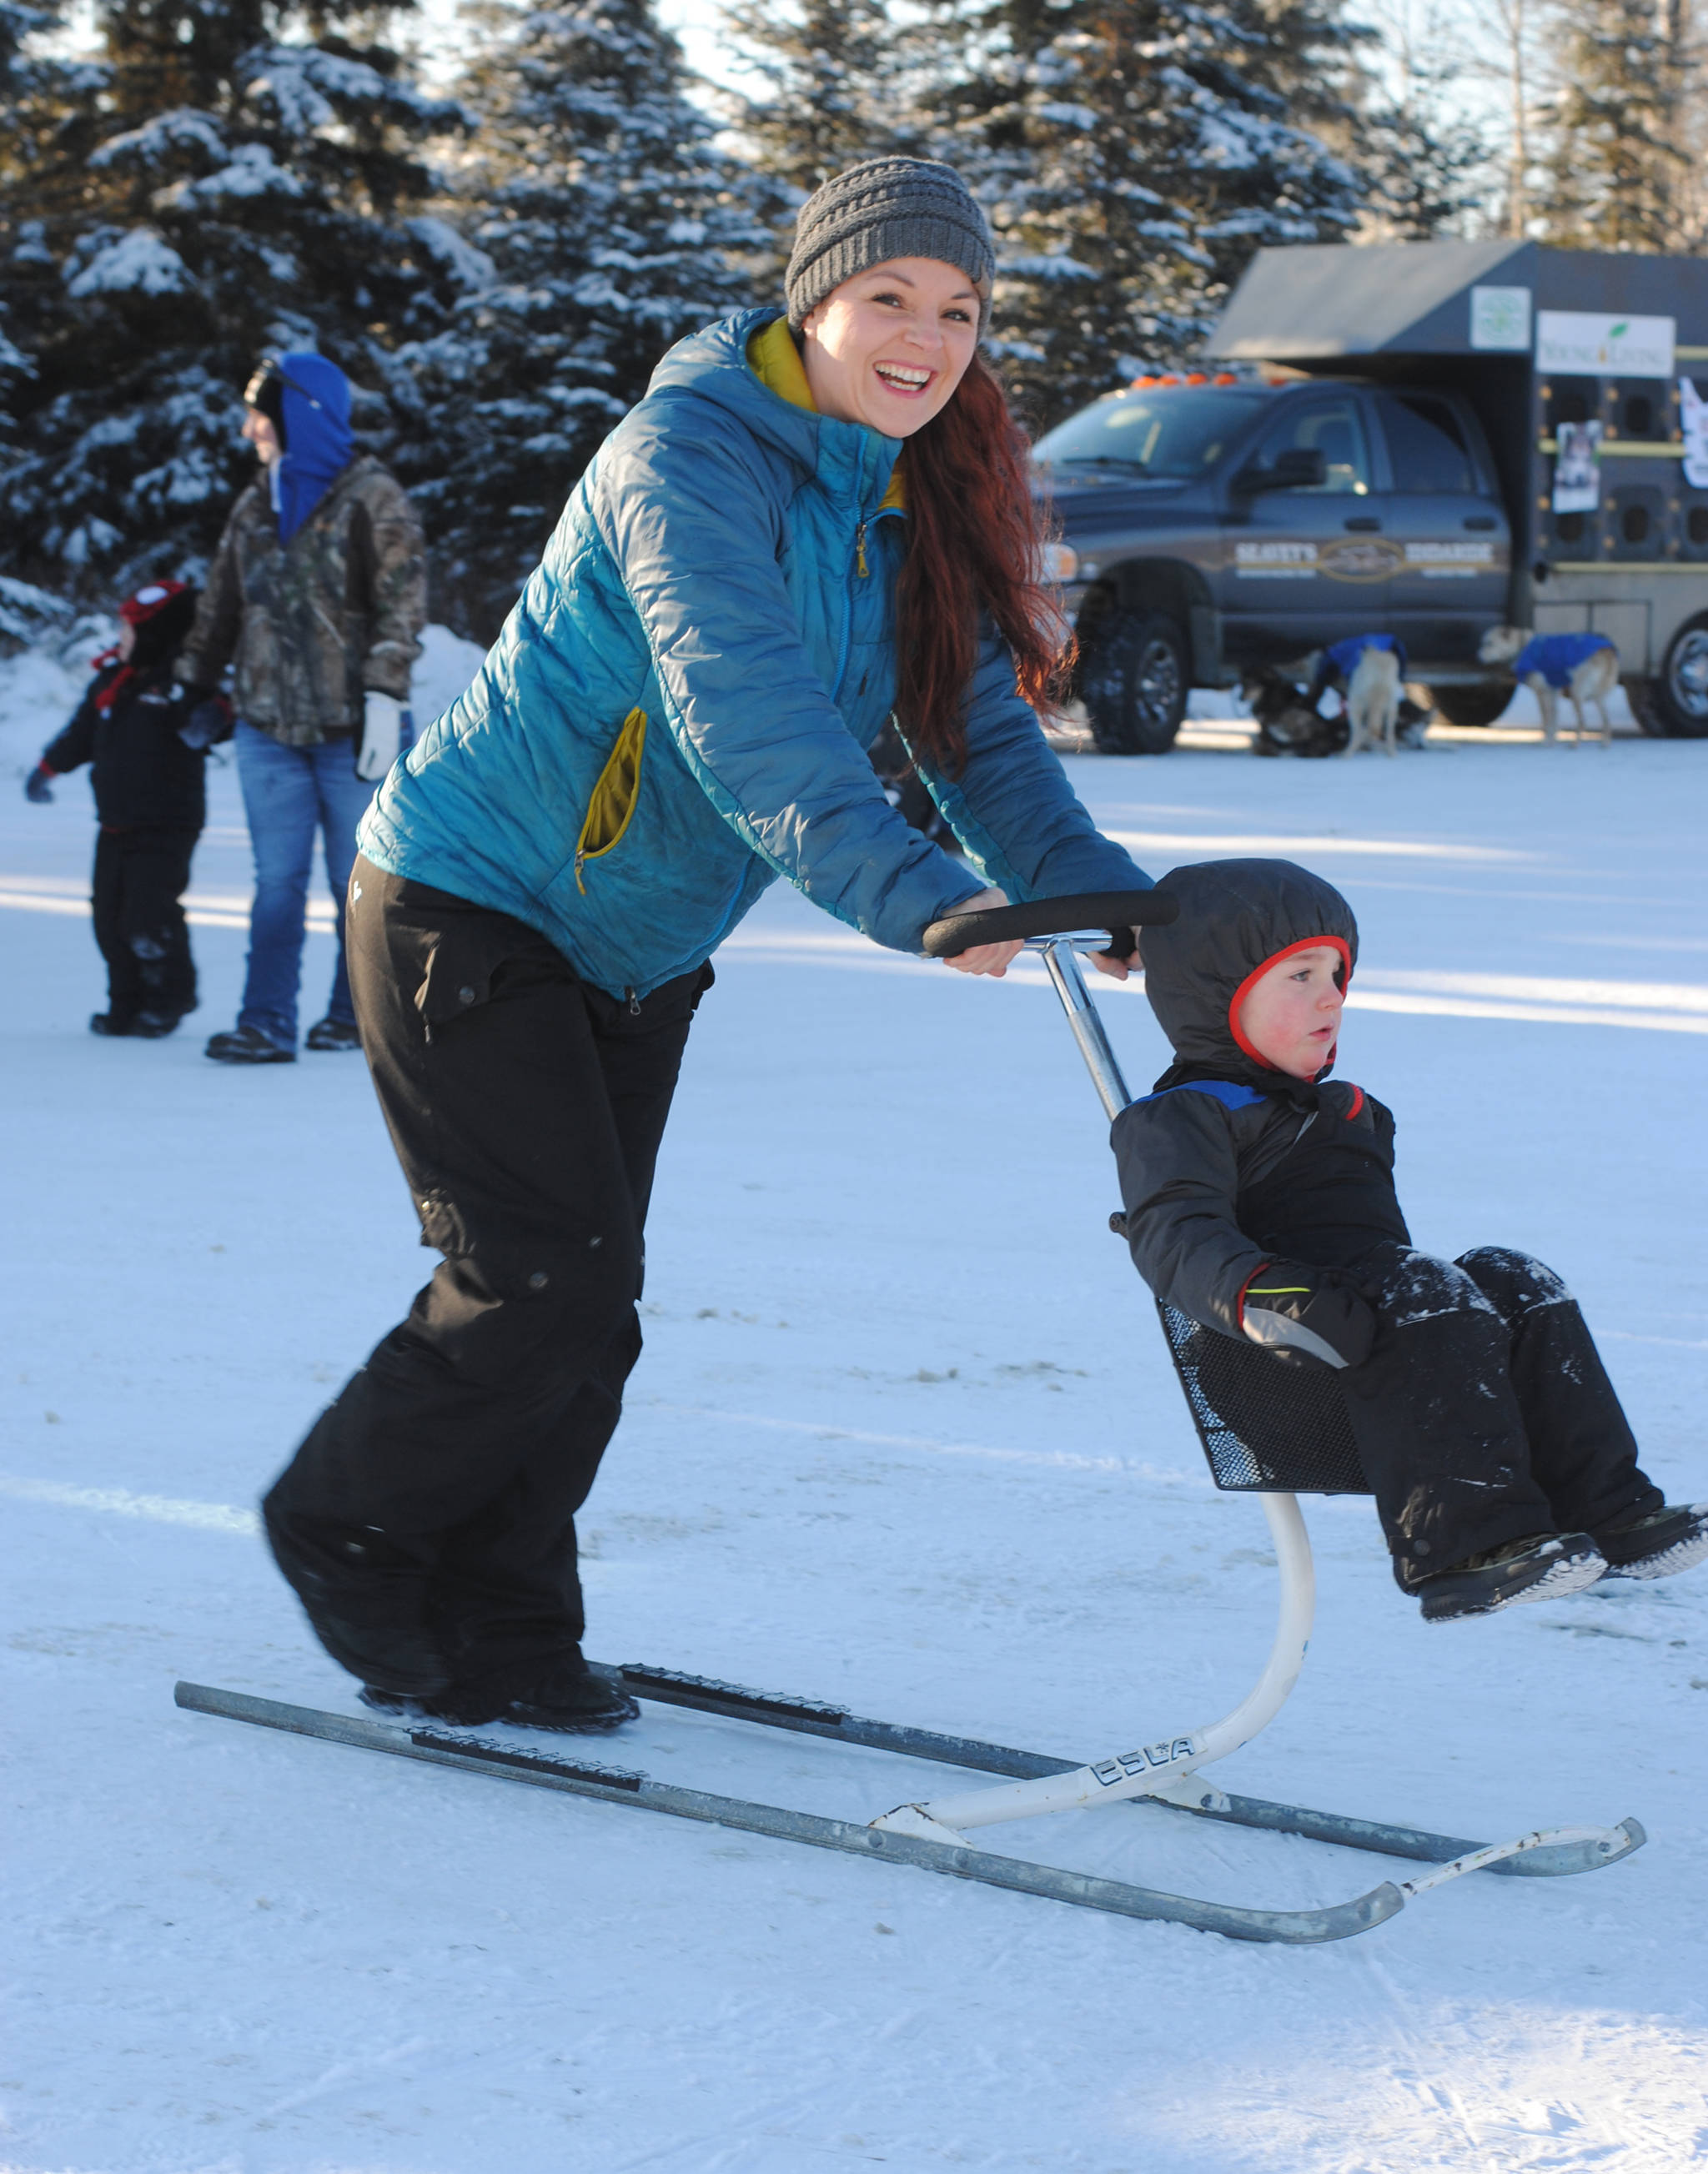 Donna Edmunds, of Soldotna, pushes her son Lucas on a ski buggy during the annual Peninsula Winter Games, which returned to Soldotna for the forty second year on Saturday at the Soldotna Regional Sports Complex. The event offered an array of children’s events and activities, including a Monopoly tournament, an outdoor film, free lunch and a carnival. The Kenai Peninsula Hockey Association also held an invitational hockey tournament during the event. (Photo by Kat Sorensen/Peninsula Clarion)